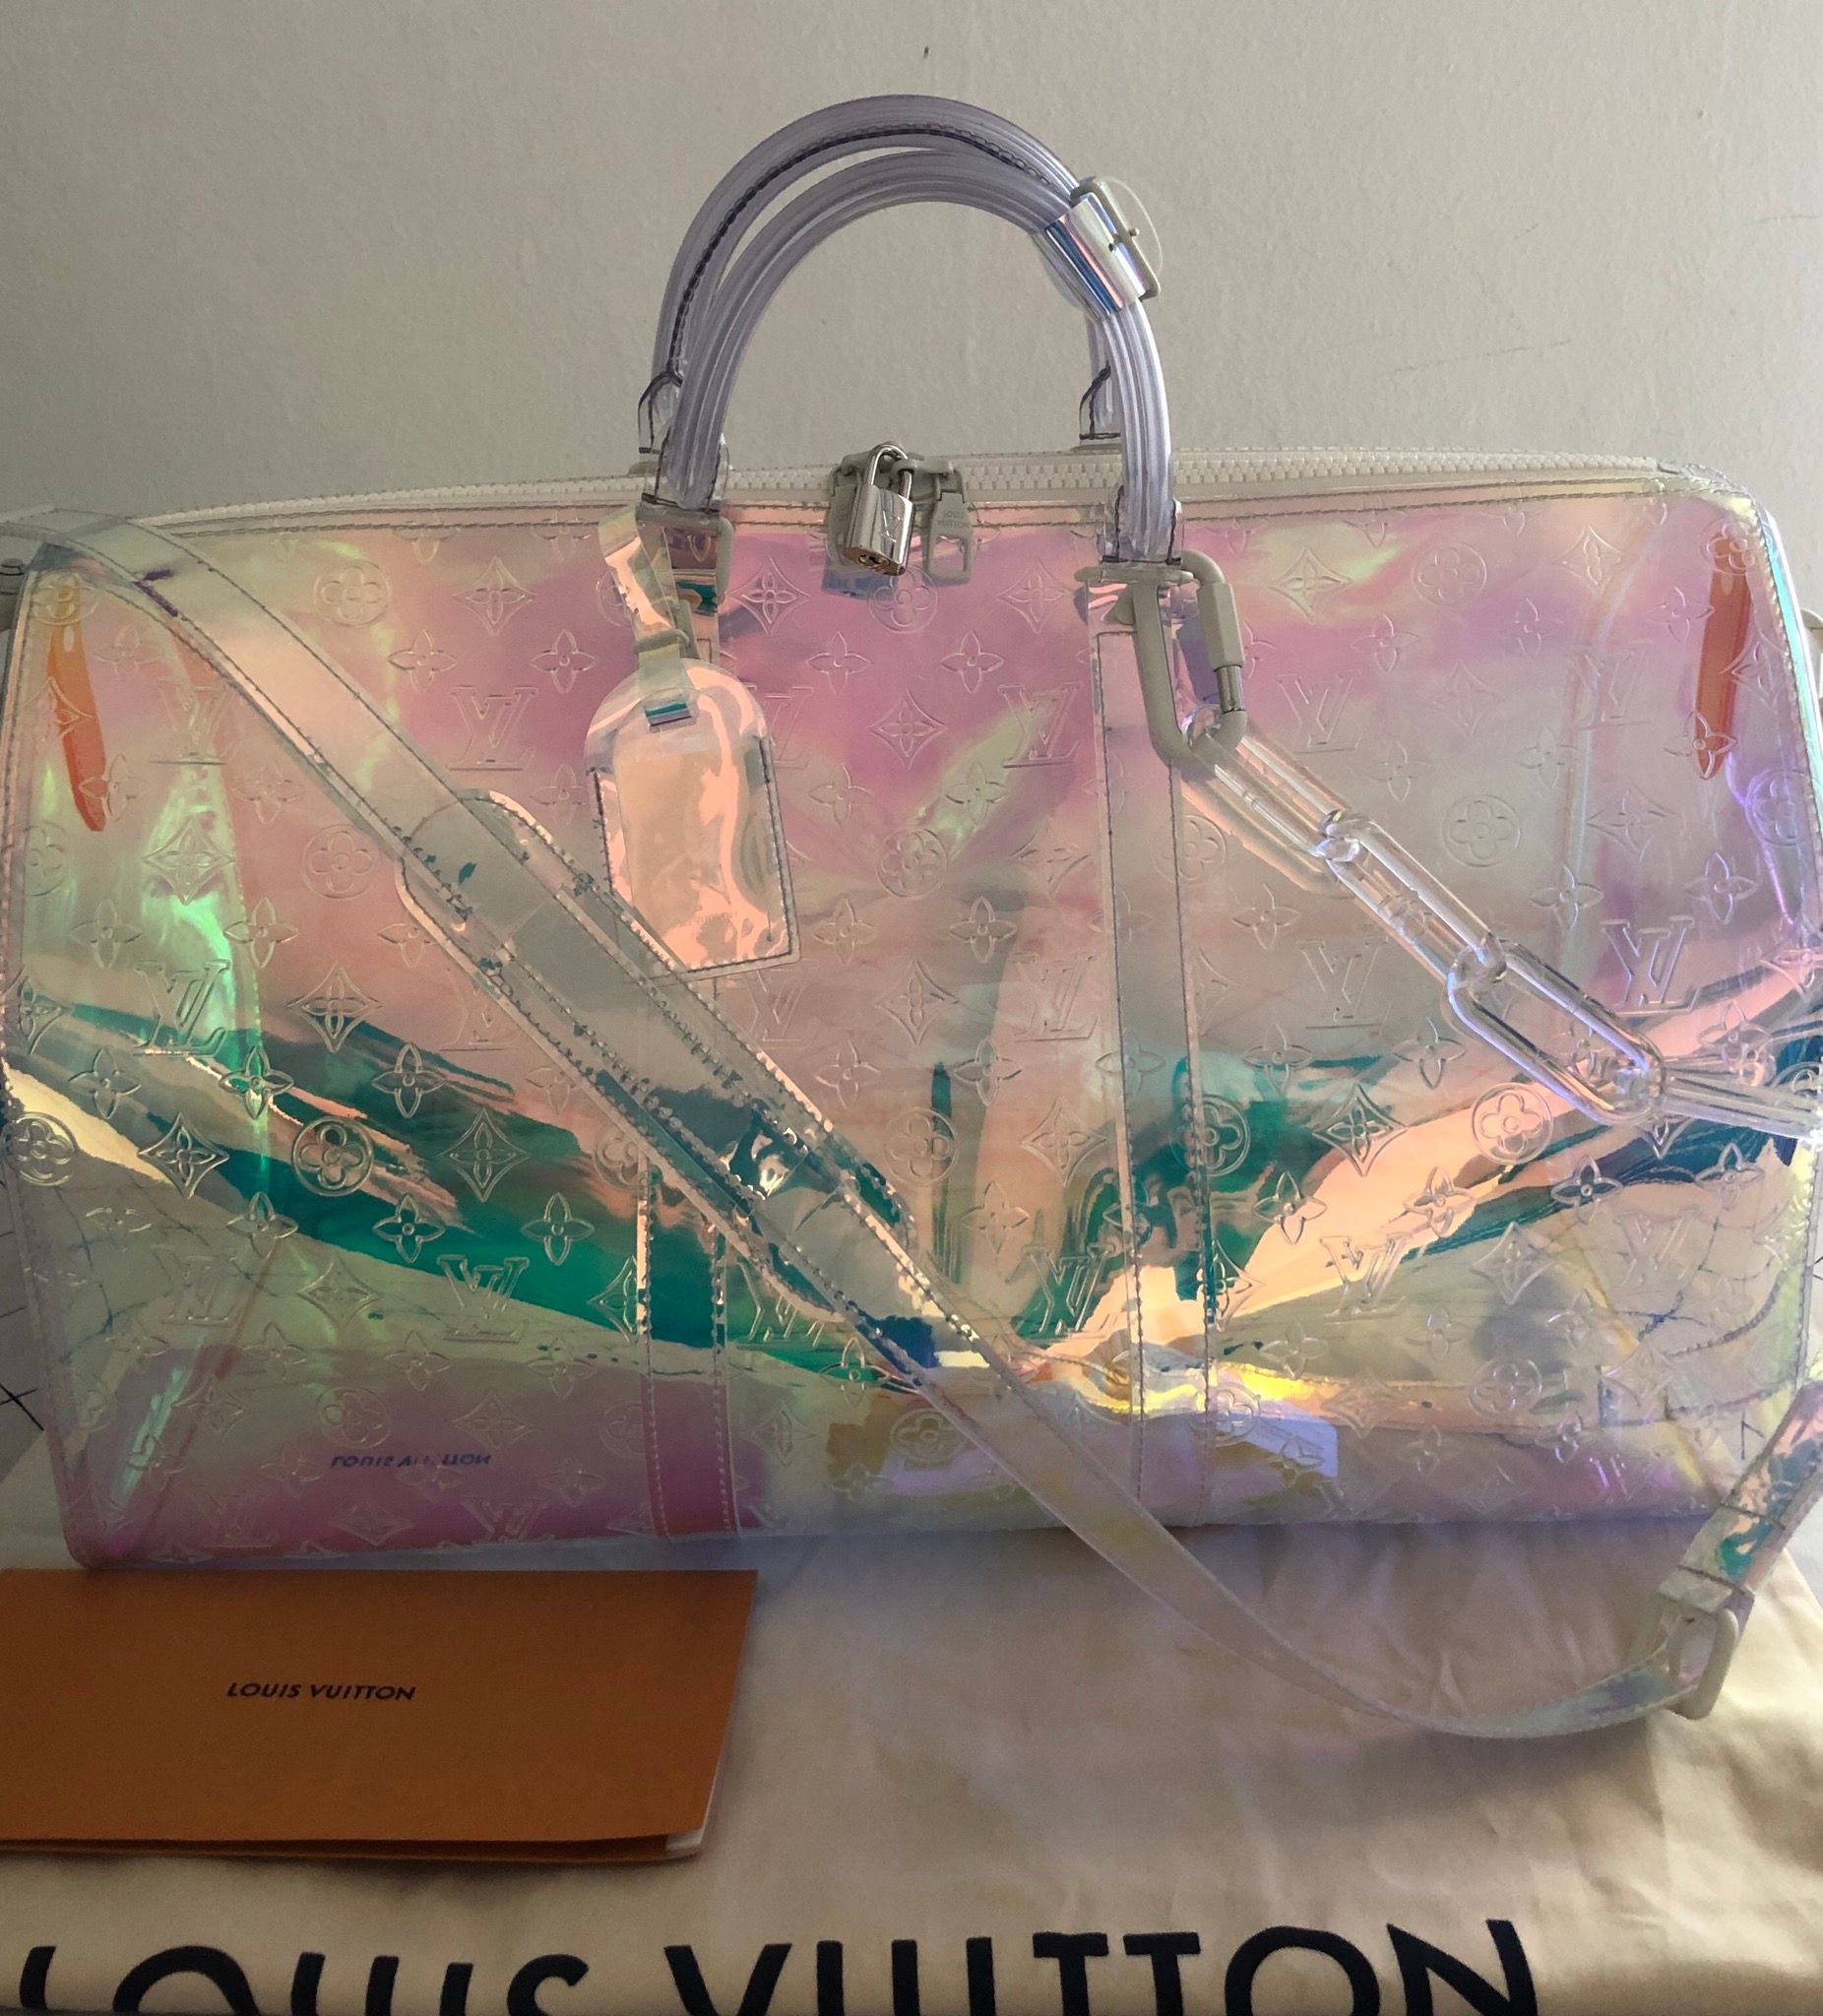 Louis Vuitton Prism Virgil Abloh Iridescent Monogram Keepall Bandoulière 50  White And Silver Tone Hardware Available For Immediate Sale At Sotheby's